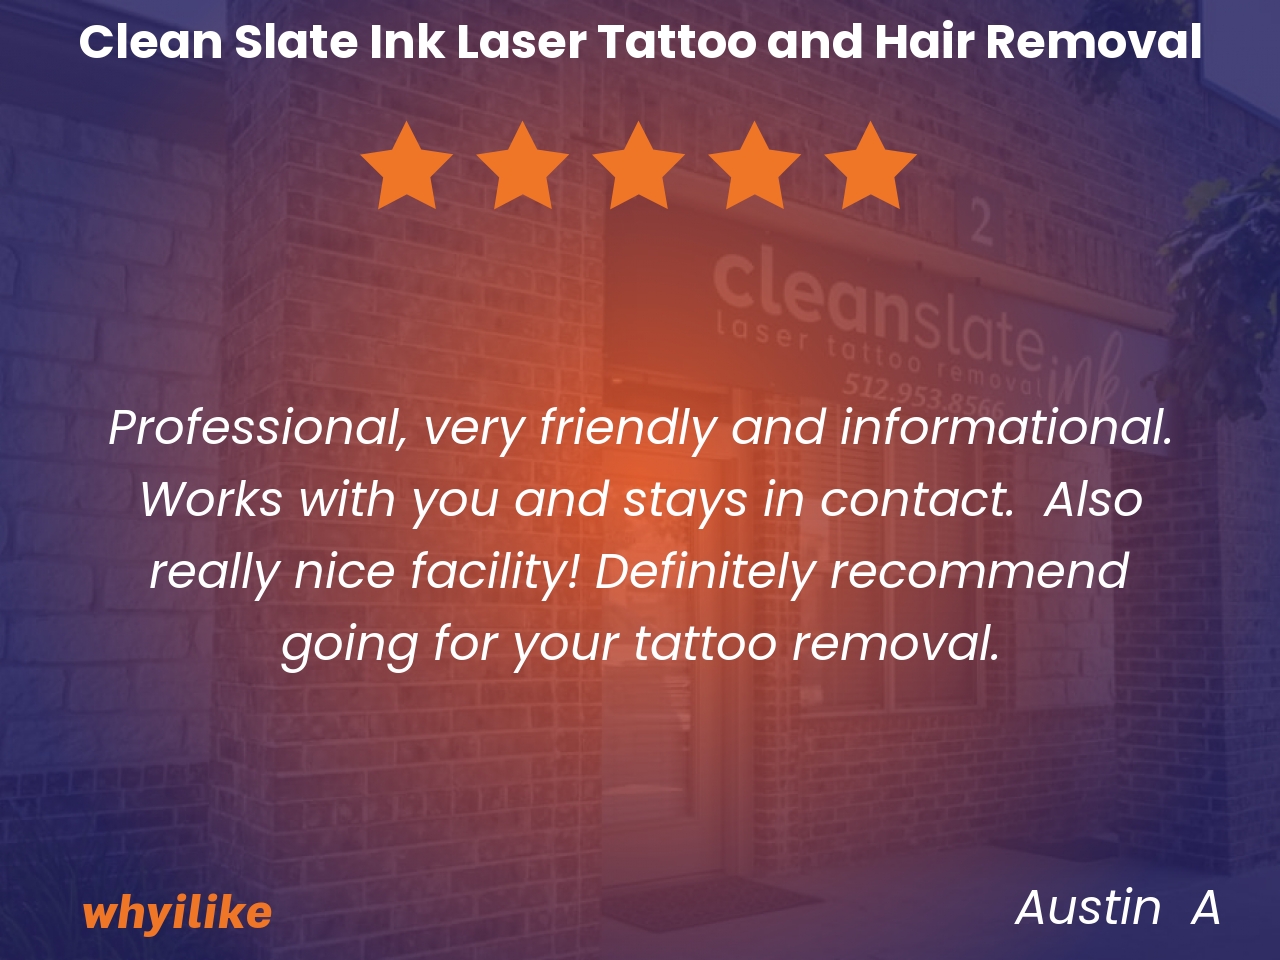 Why I like Clean Slate Ink Laser Tattoo and Hair Removal